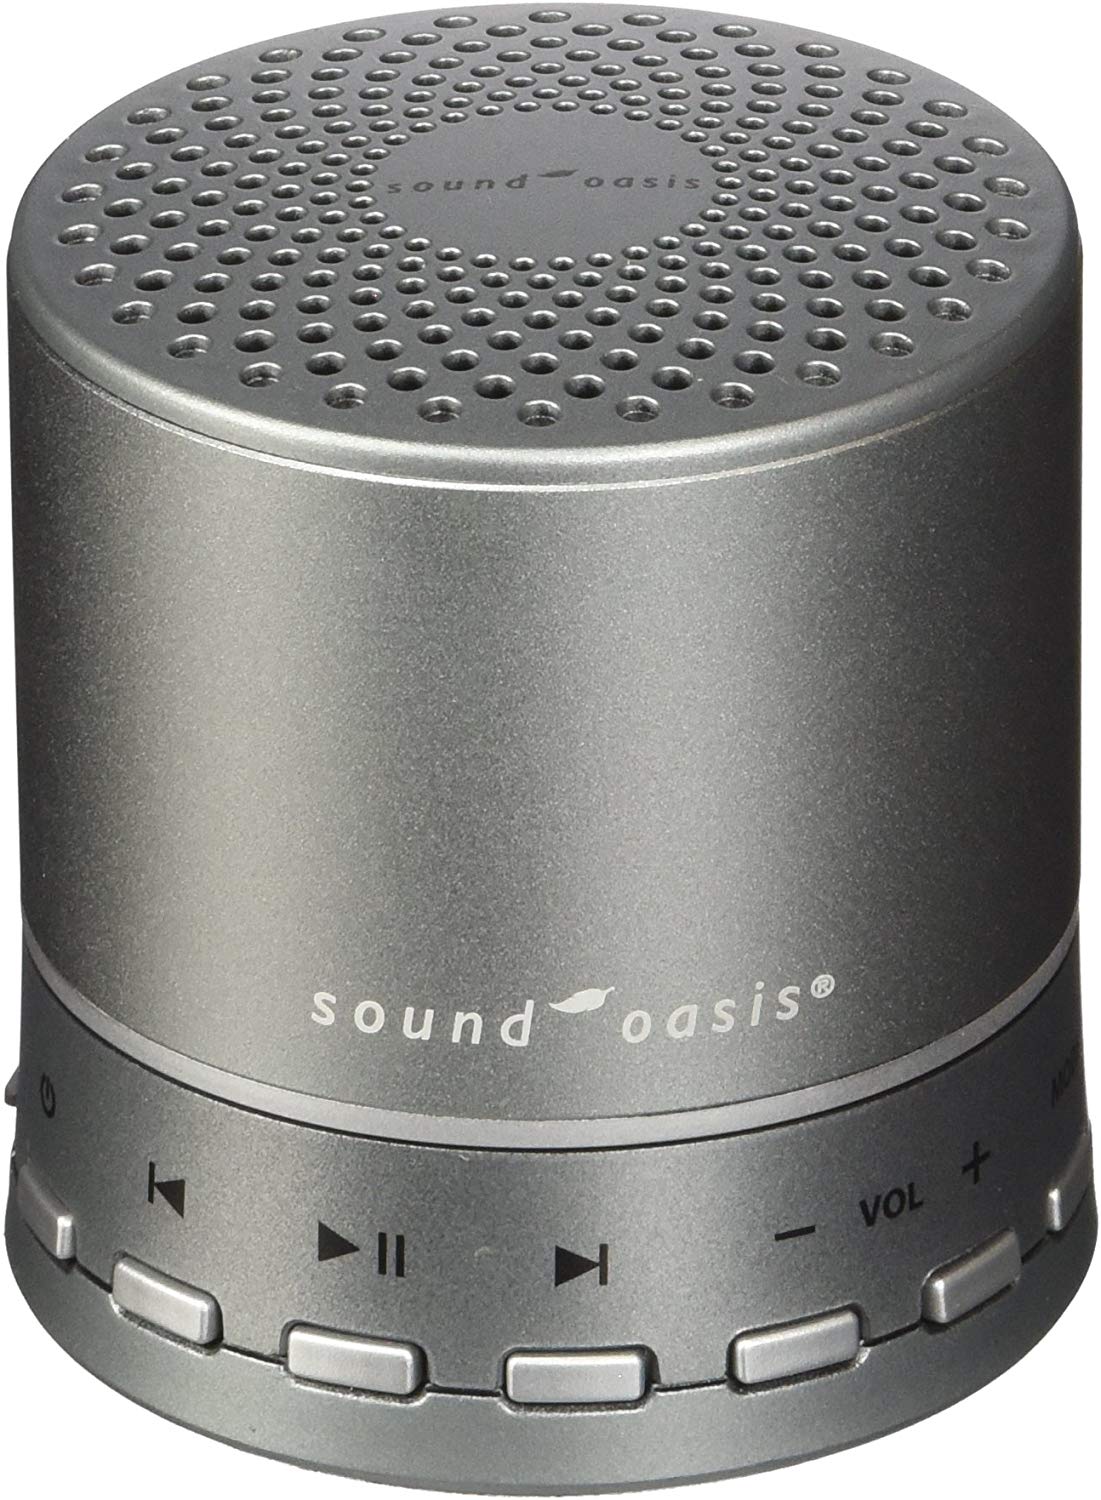 white noise machine for office privacy bulk